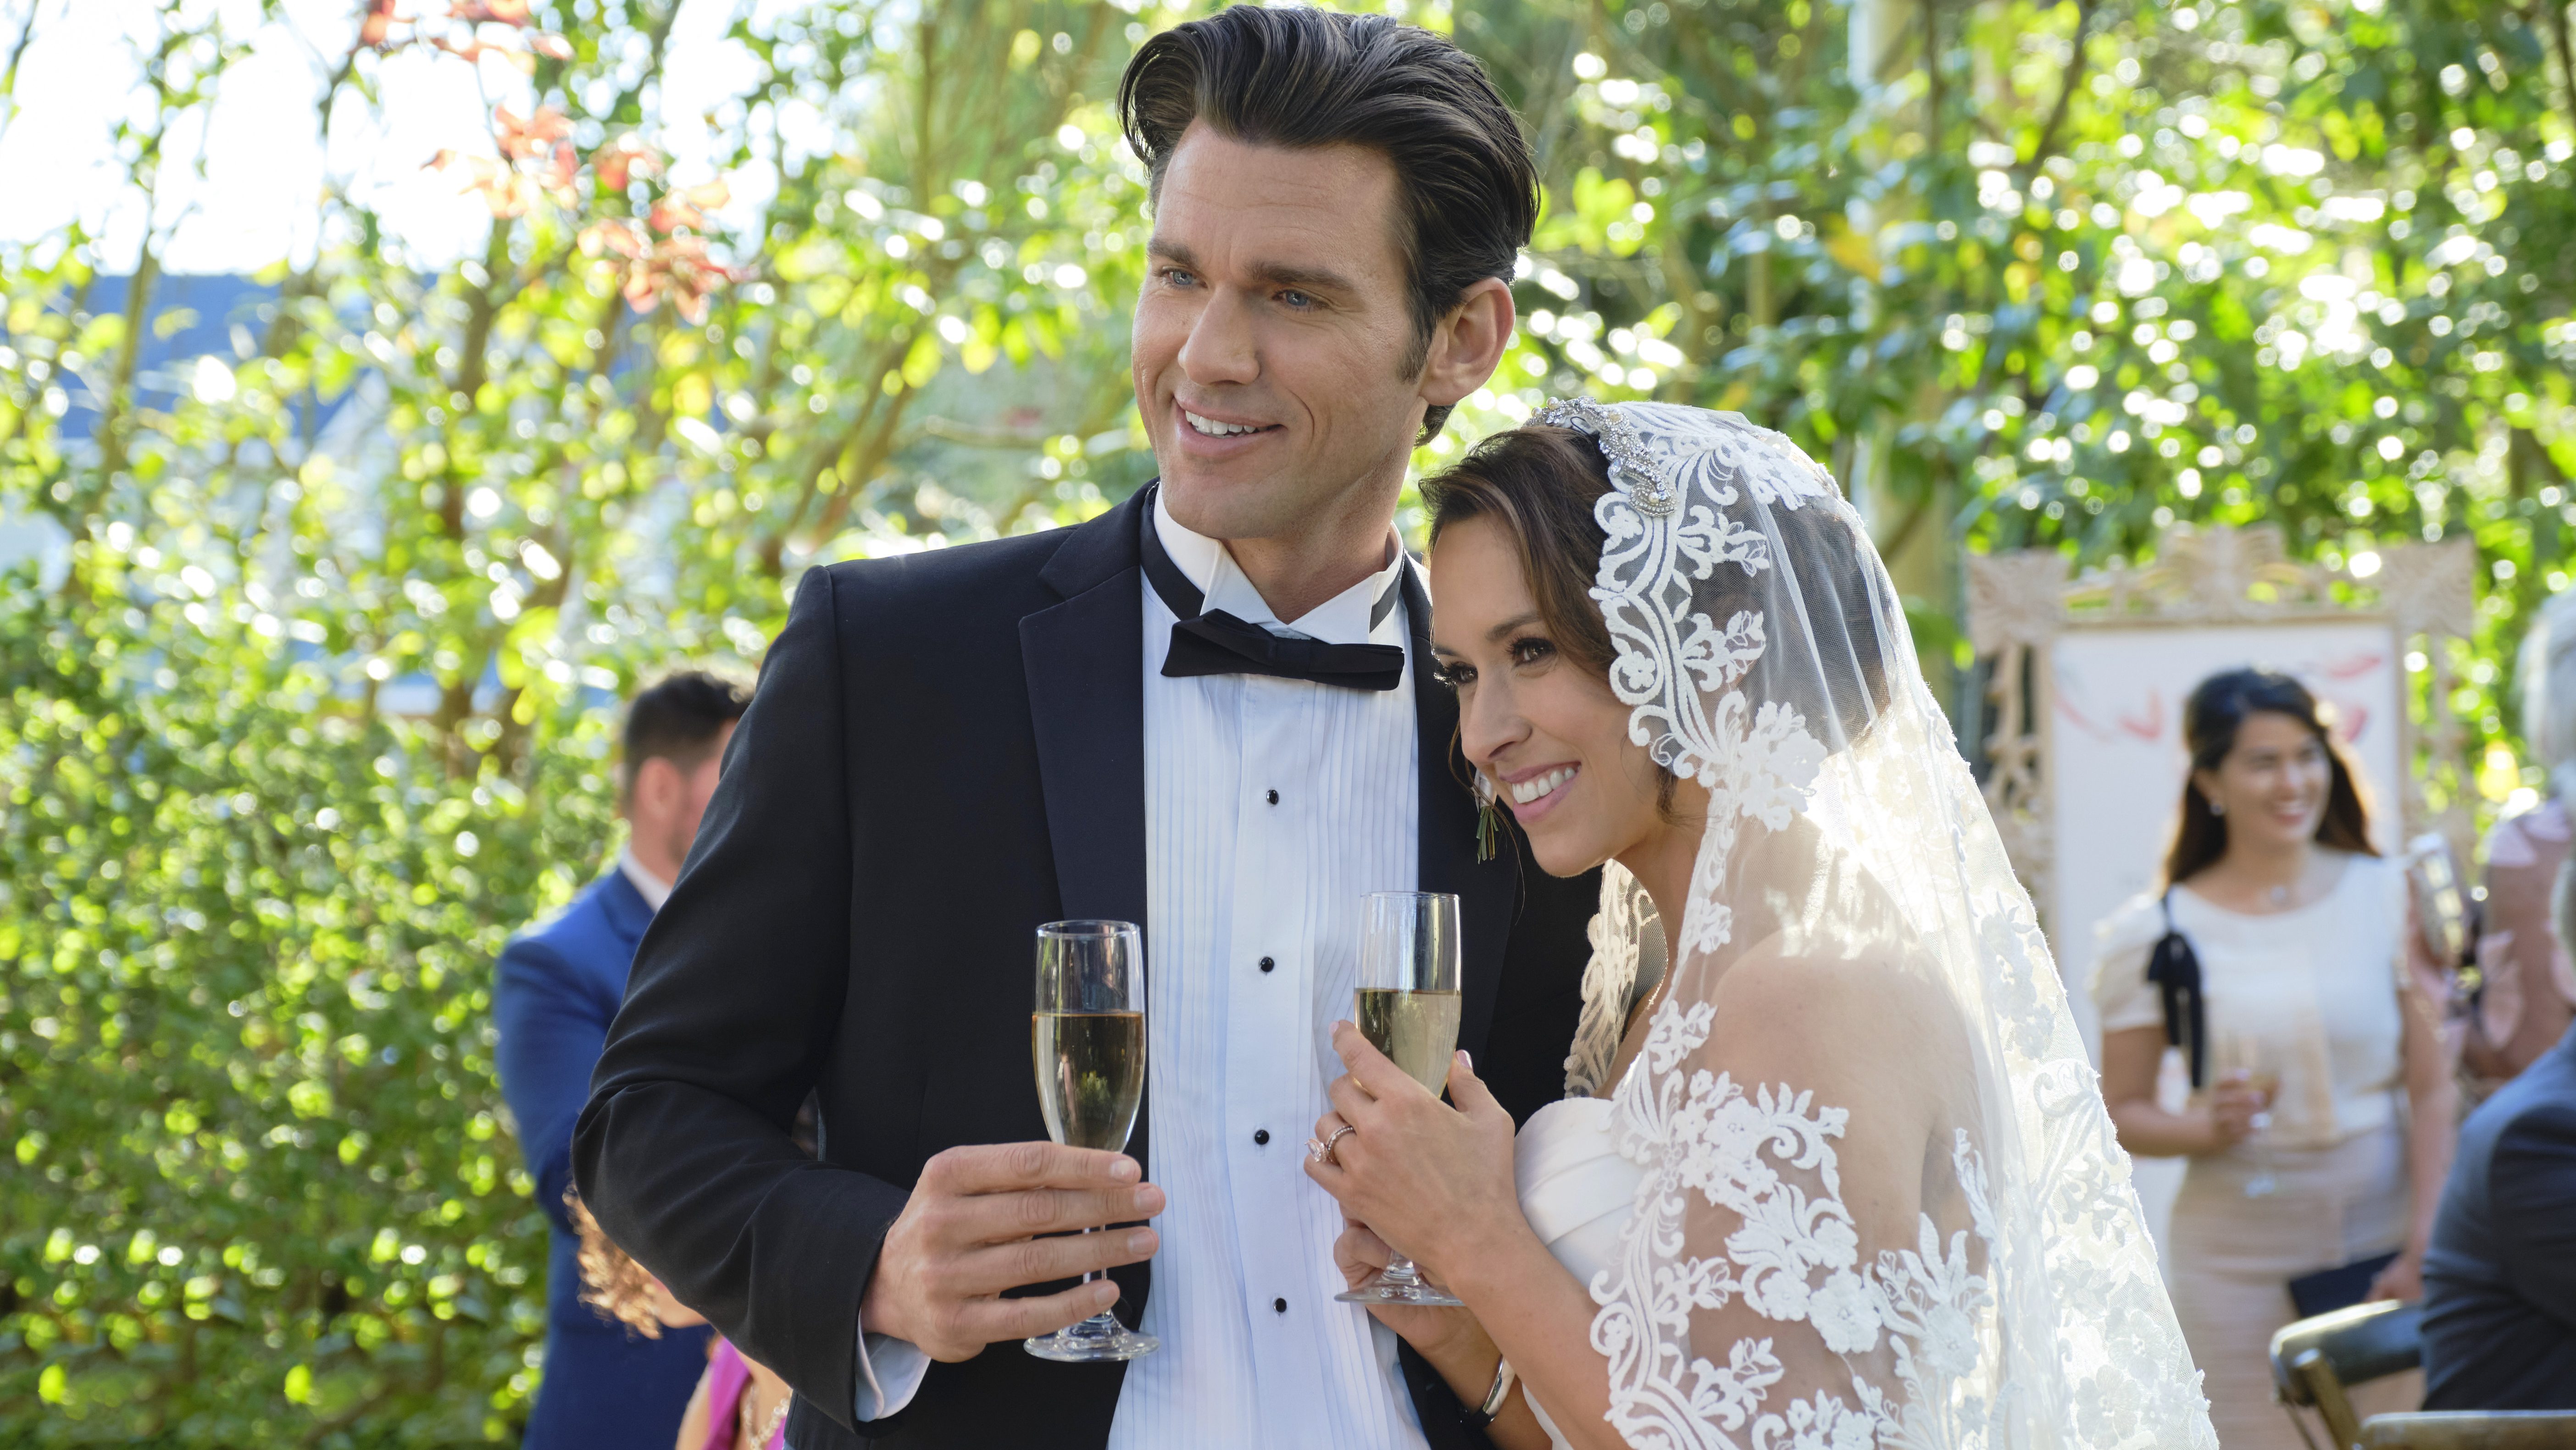 Kevin McGarry, Lacey Chabert, 'The Wedding Veil', 2021